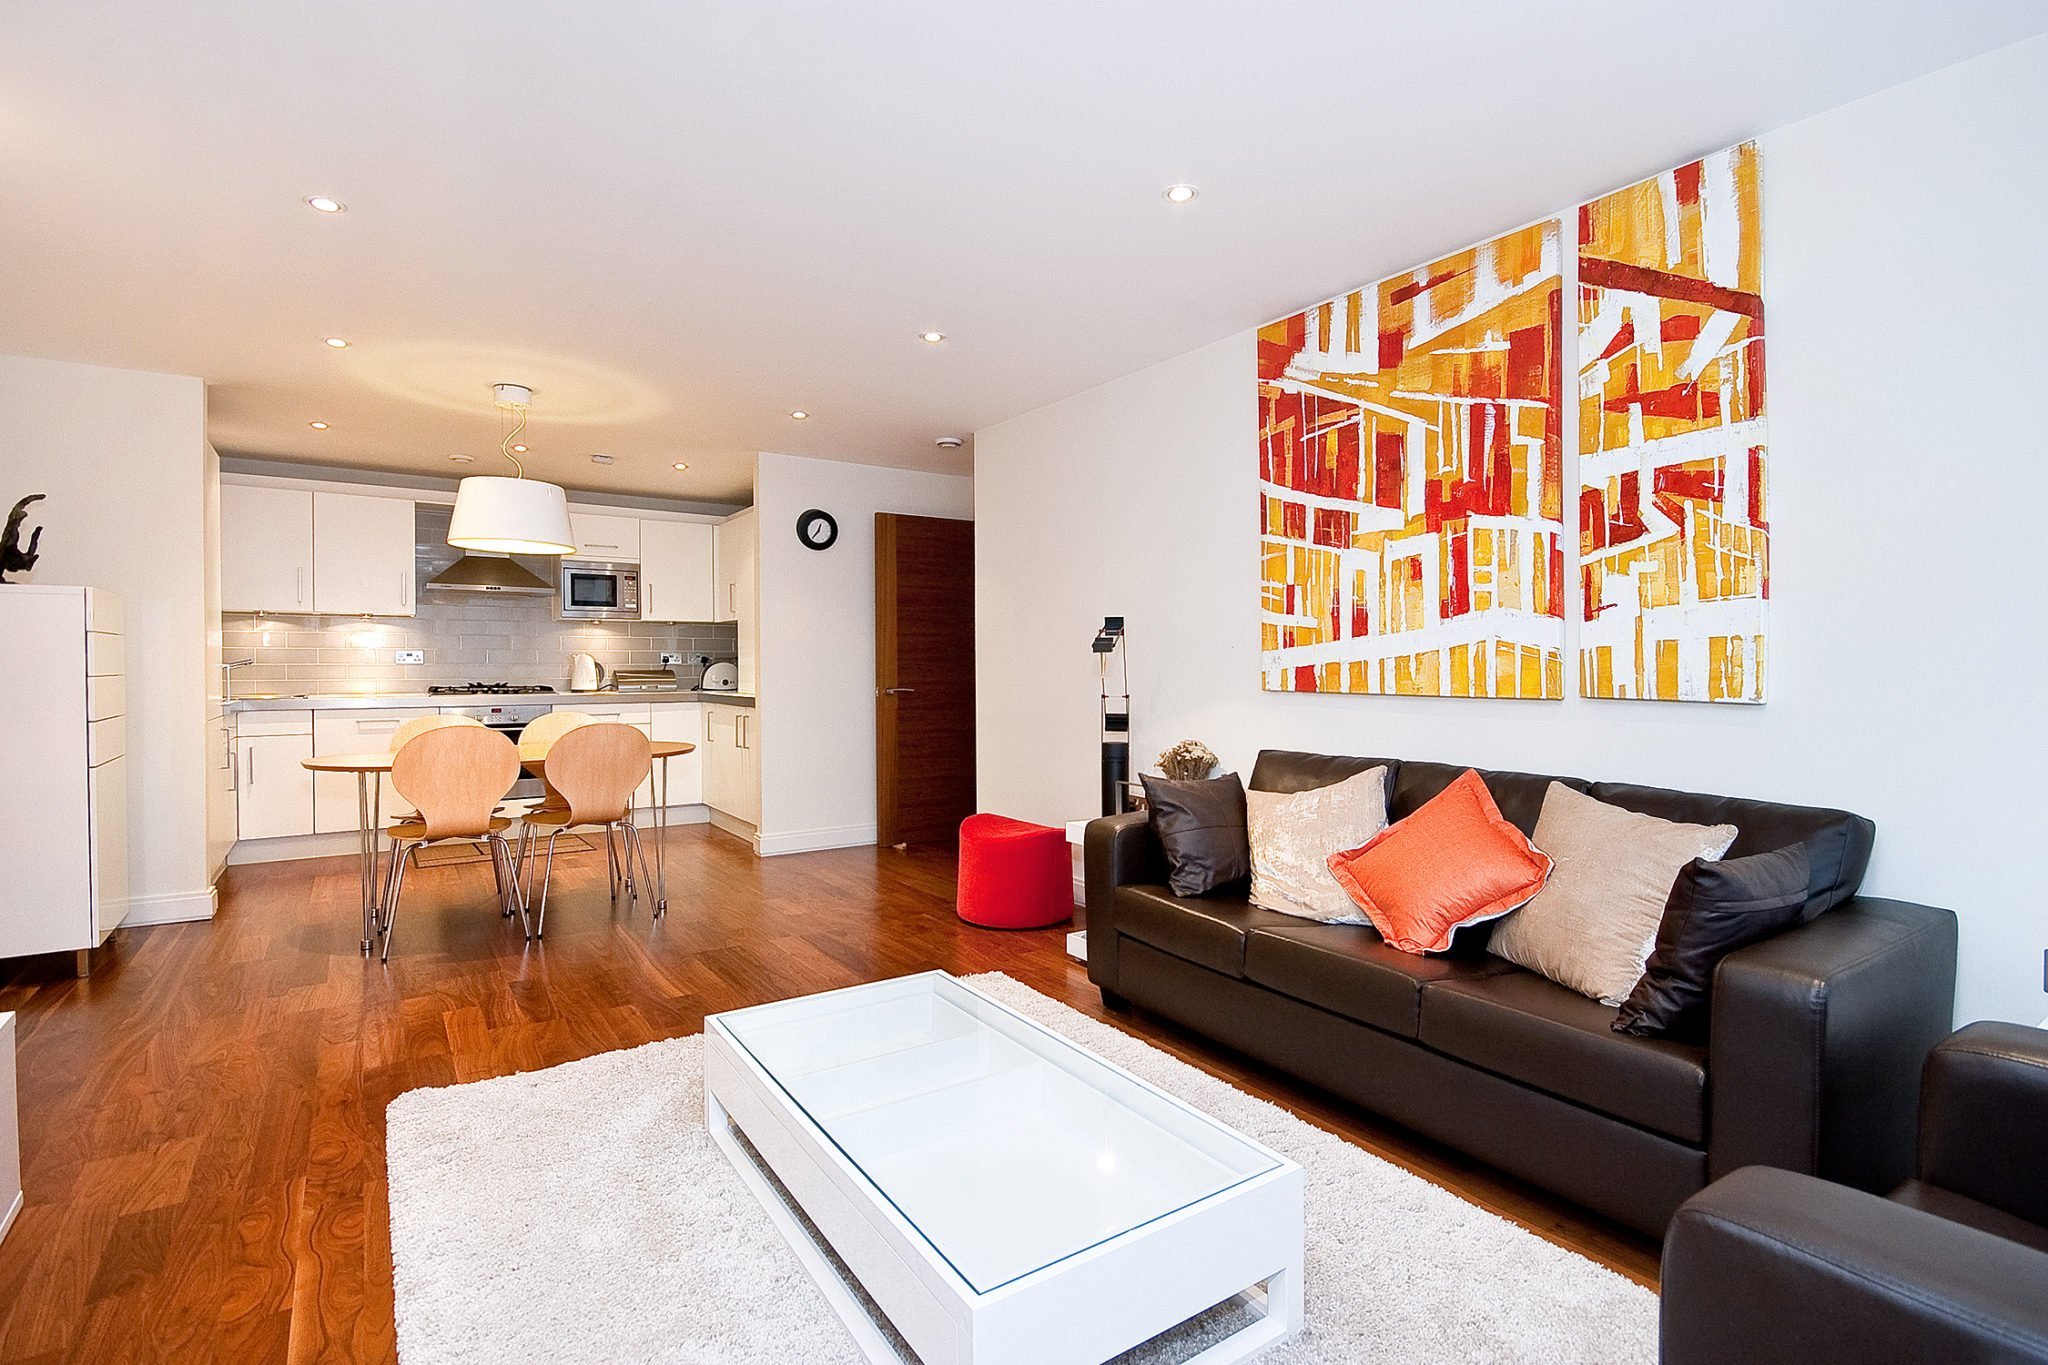 Serviced-Accommodation-Barbican-|-Serviced-Apartments-Clerkenwell-London-City-|-Corporate-Accommodation-London-City-|-BEST-RATES---NO-FEES-|-BOOK-NOW!!-Urban-Stay